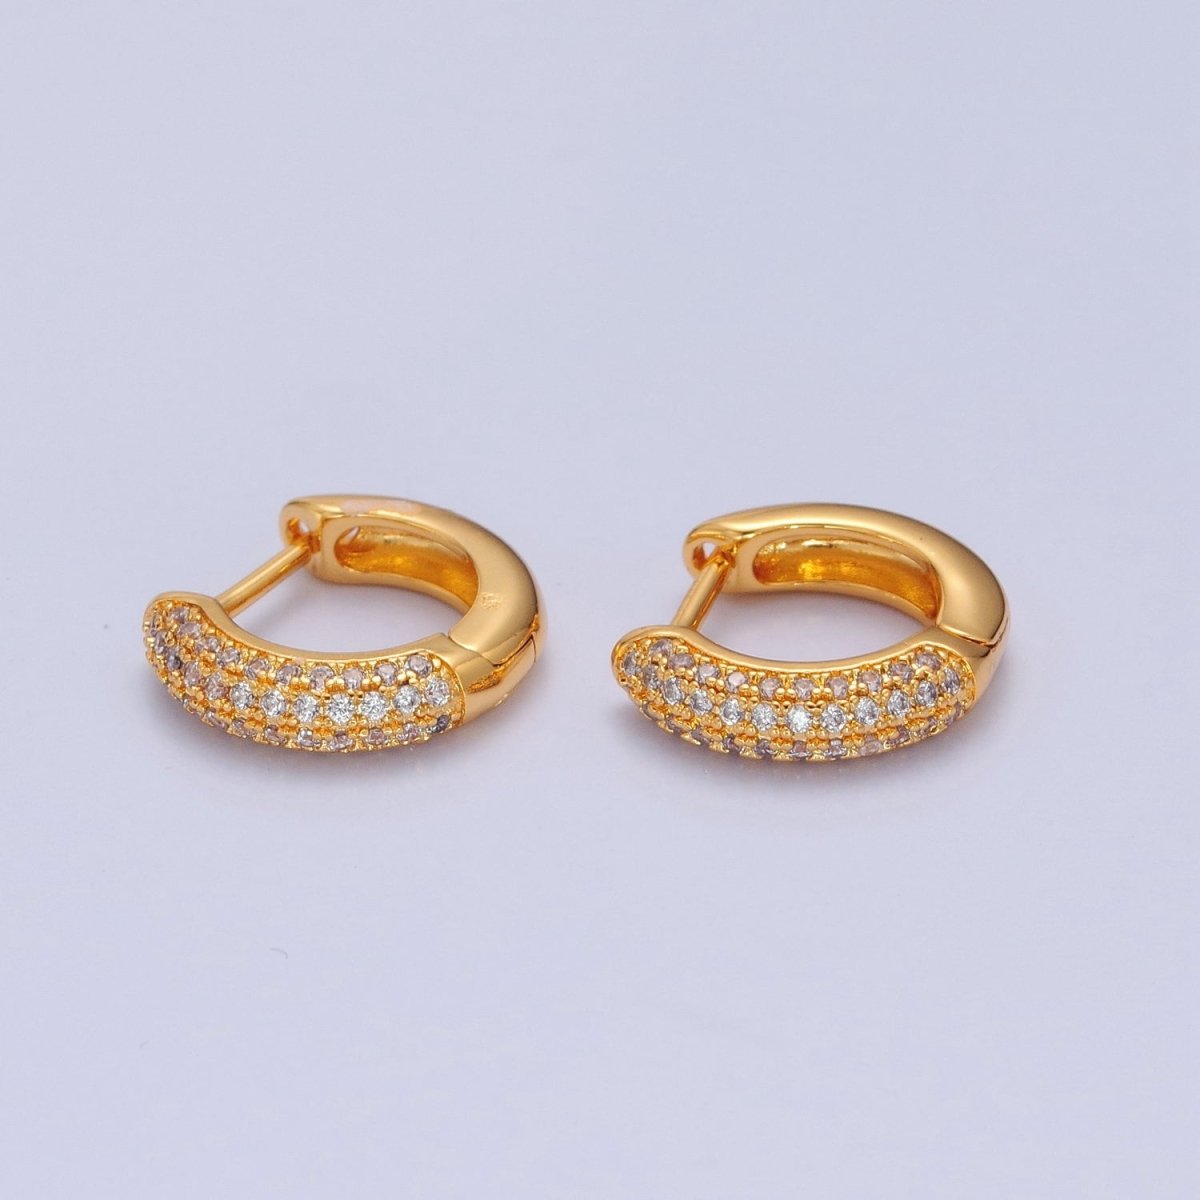 24K Gold Filled CZ Hoop Earrings Small Lever Back Huggie Hoop Earrings-Dainty CZ Earrings T-456 - DLUXCA